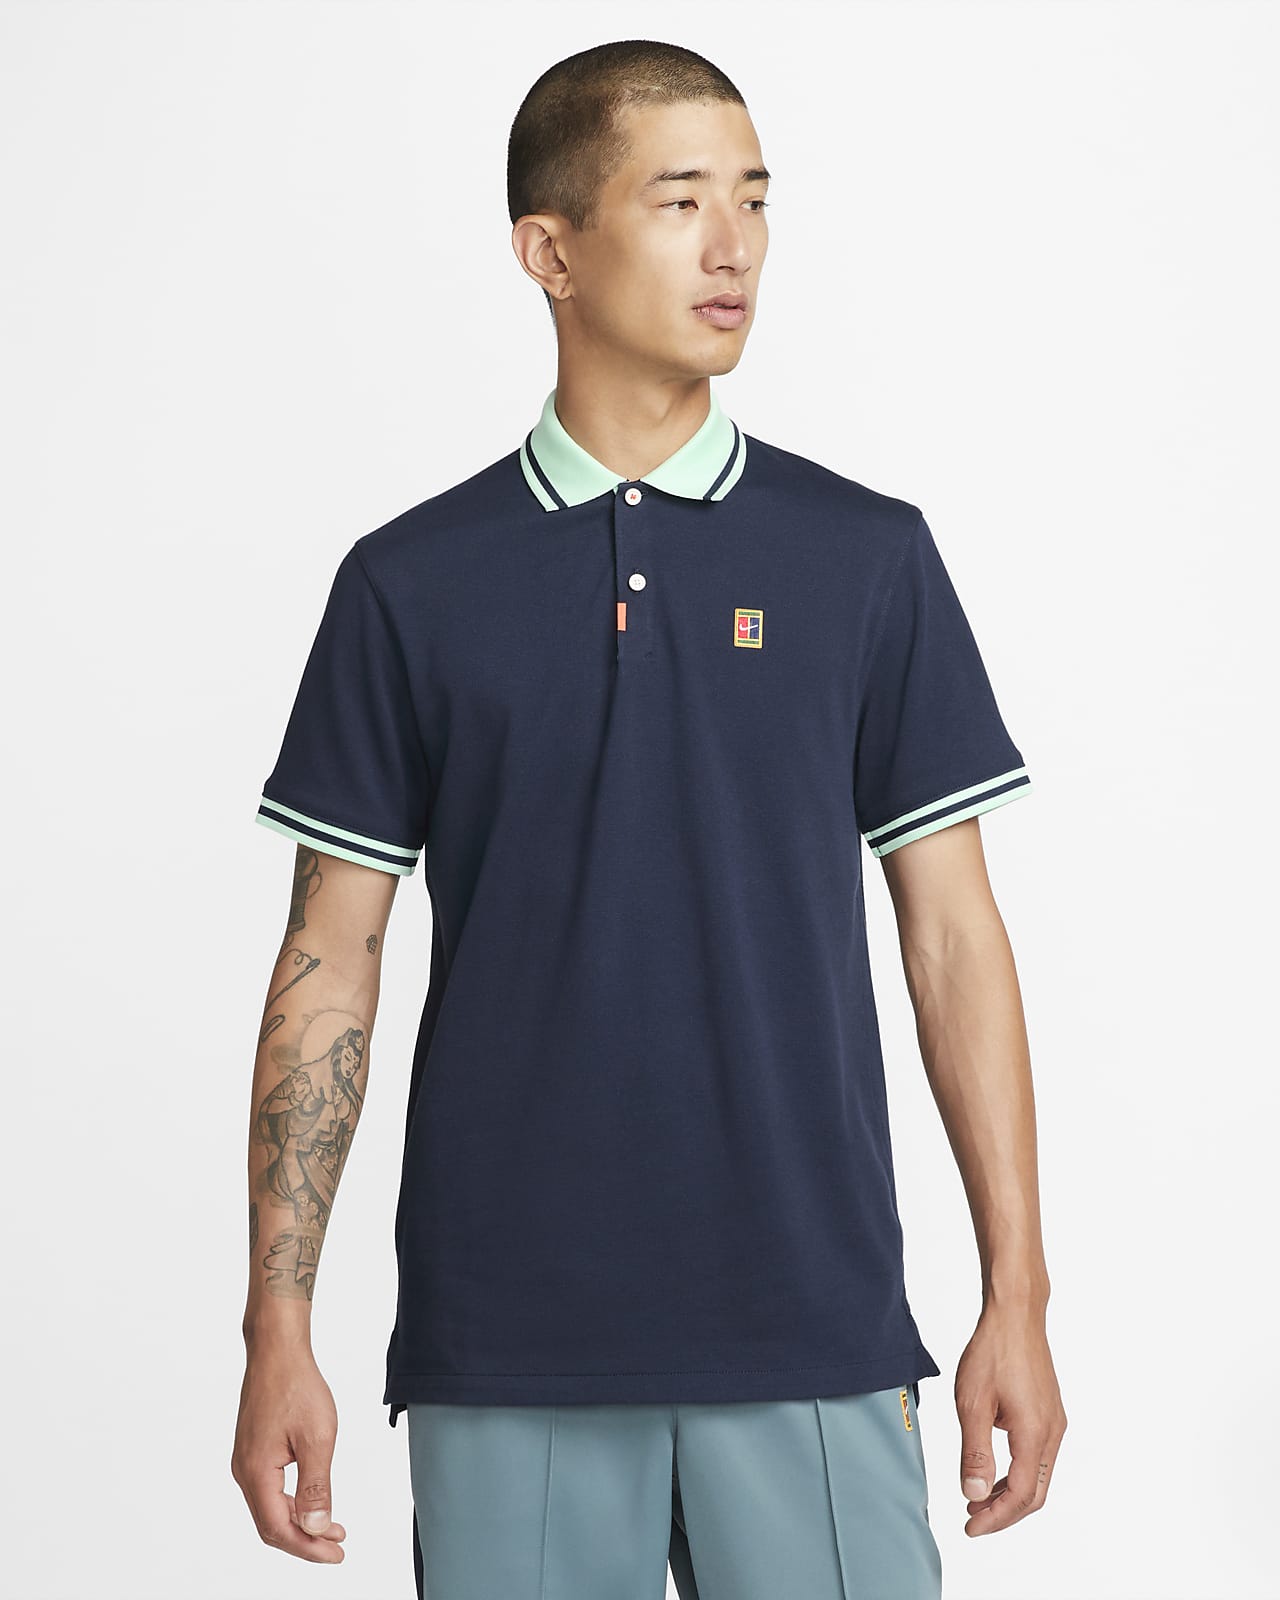 The Nike Polo Men's Slim-Fit Polo